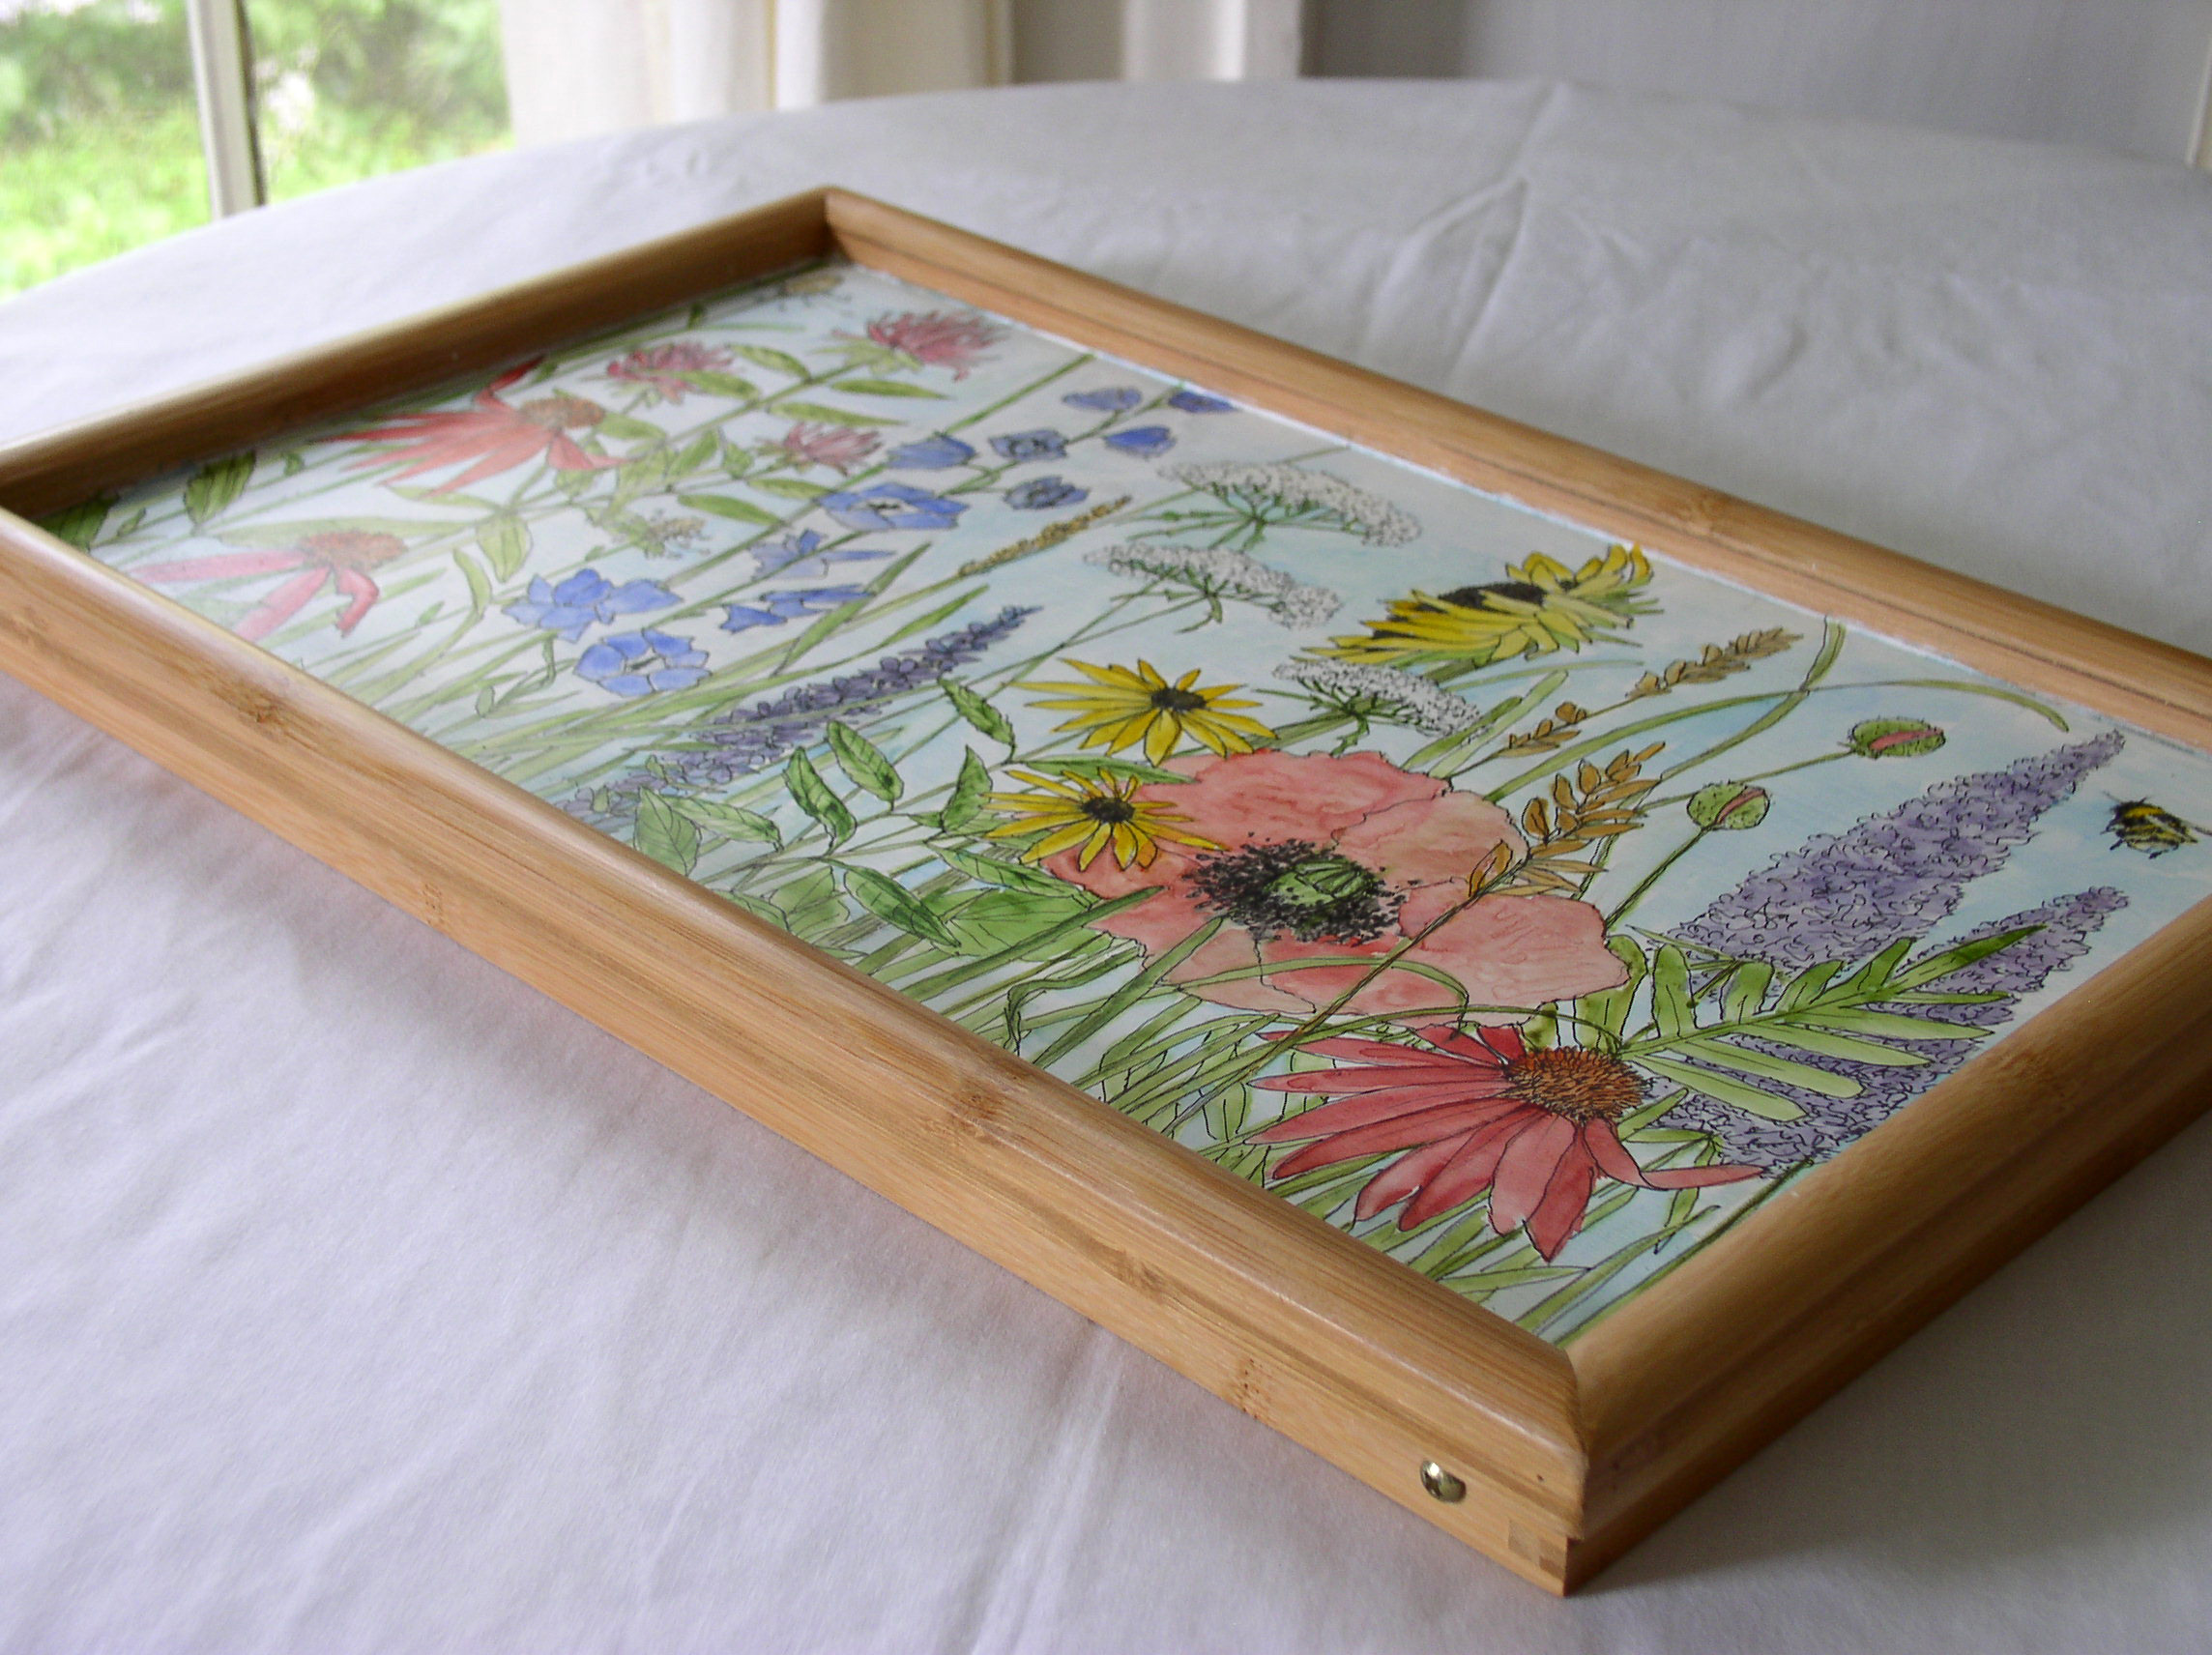 Painted Tray measures 20 x 8.5 inches Tray height with legs 20 inches high